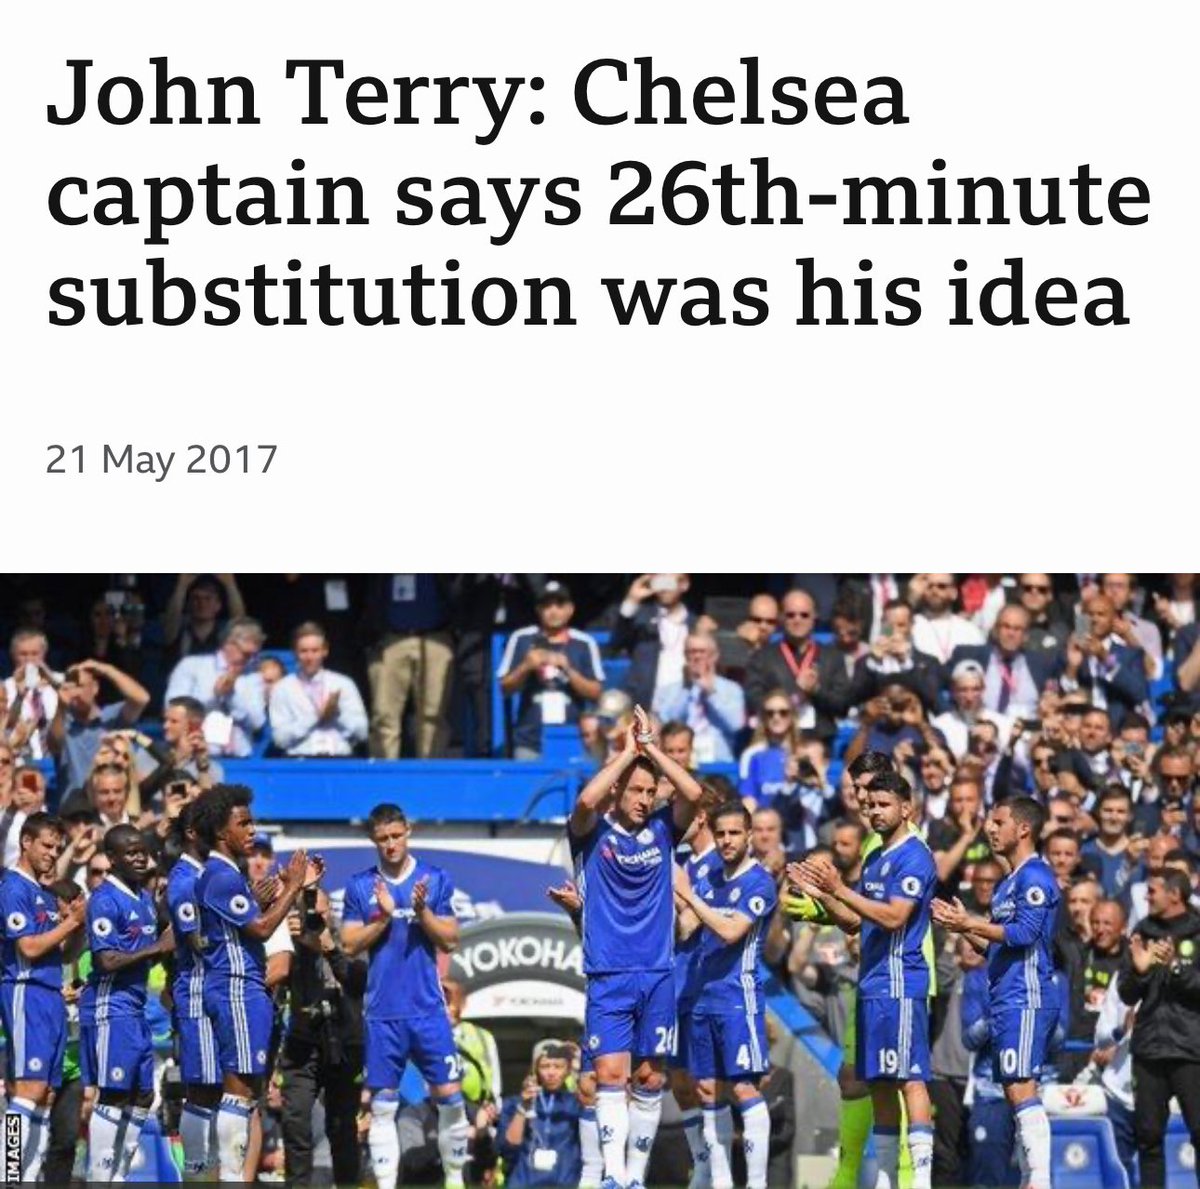 7 years ago today John Terry actually organised his own guard of honour in his final Chelsea game. 🤦🏽‍♂️